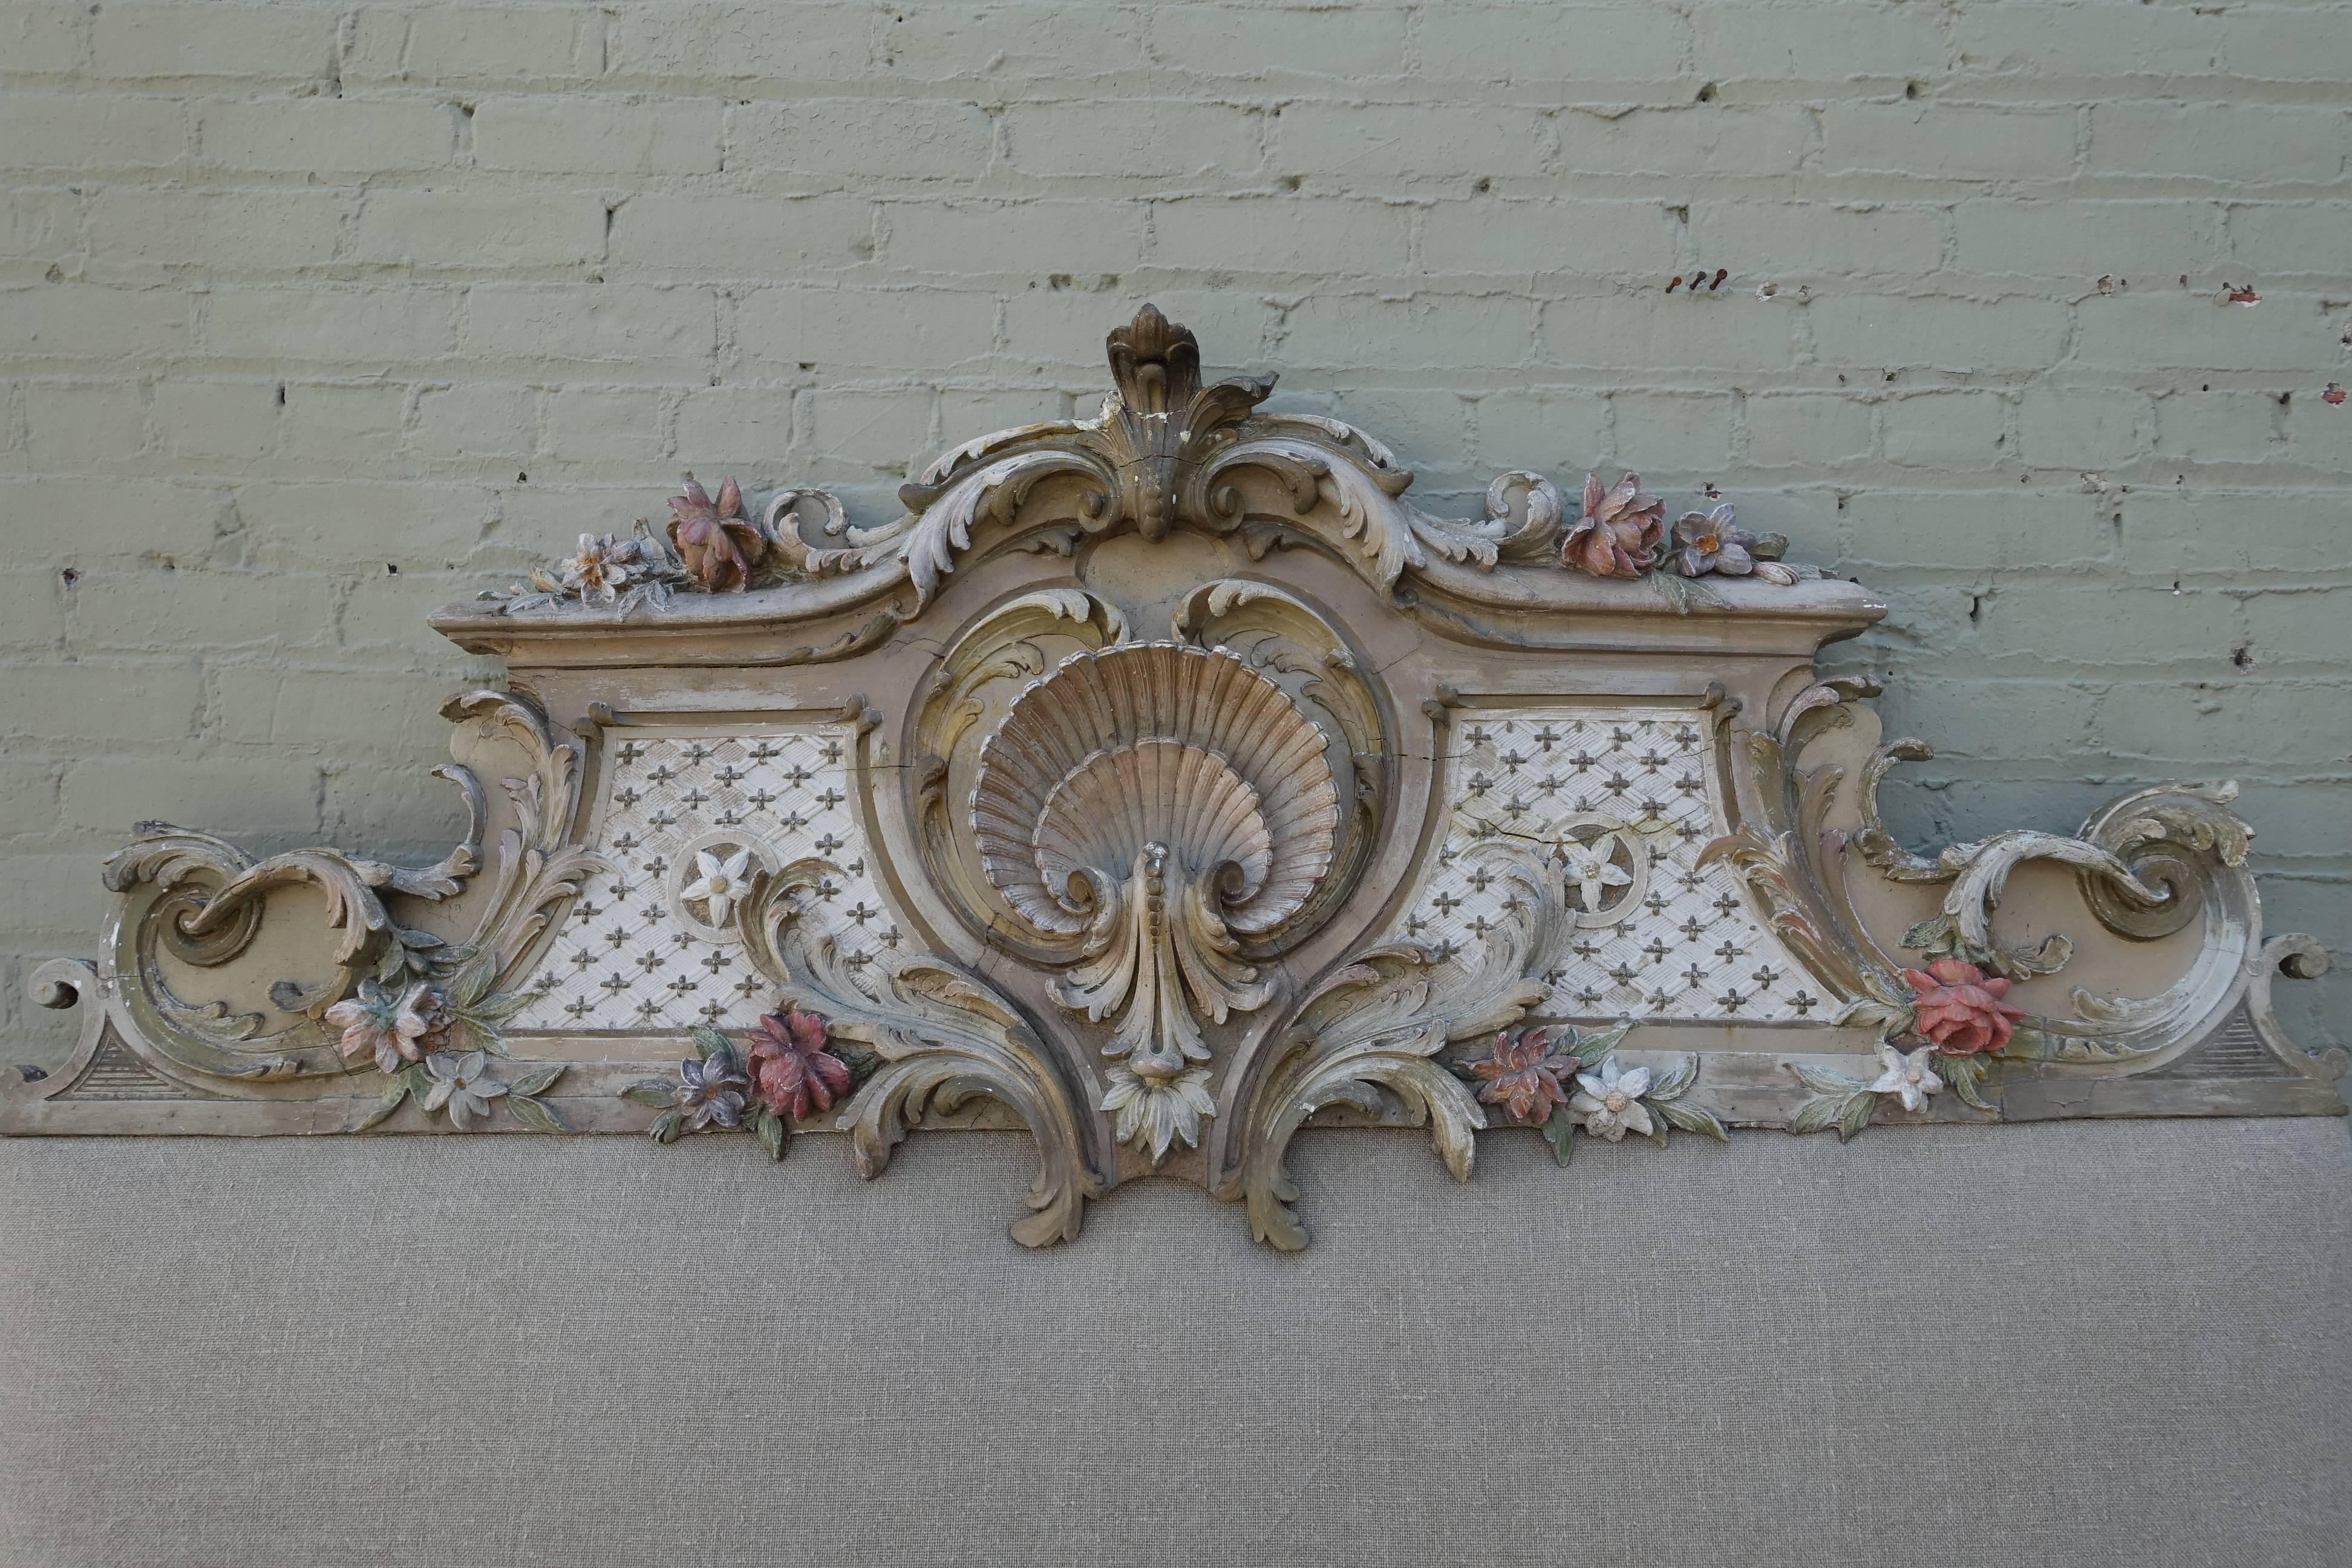 French Louis XV style carved painted headboard with new Belgium linen upholstery. Center cartouche embodies a large shell and the carved portion is adorned with swirling acanthus leaves throughout.